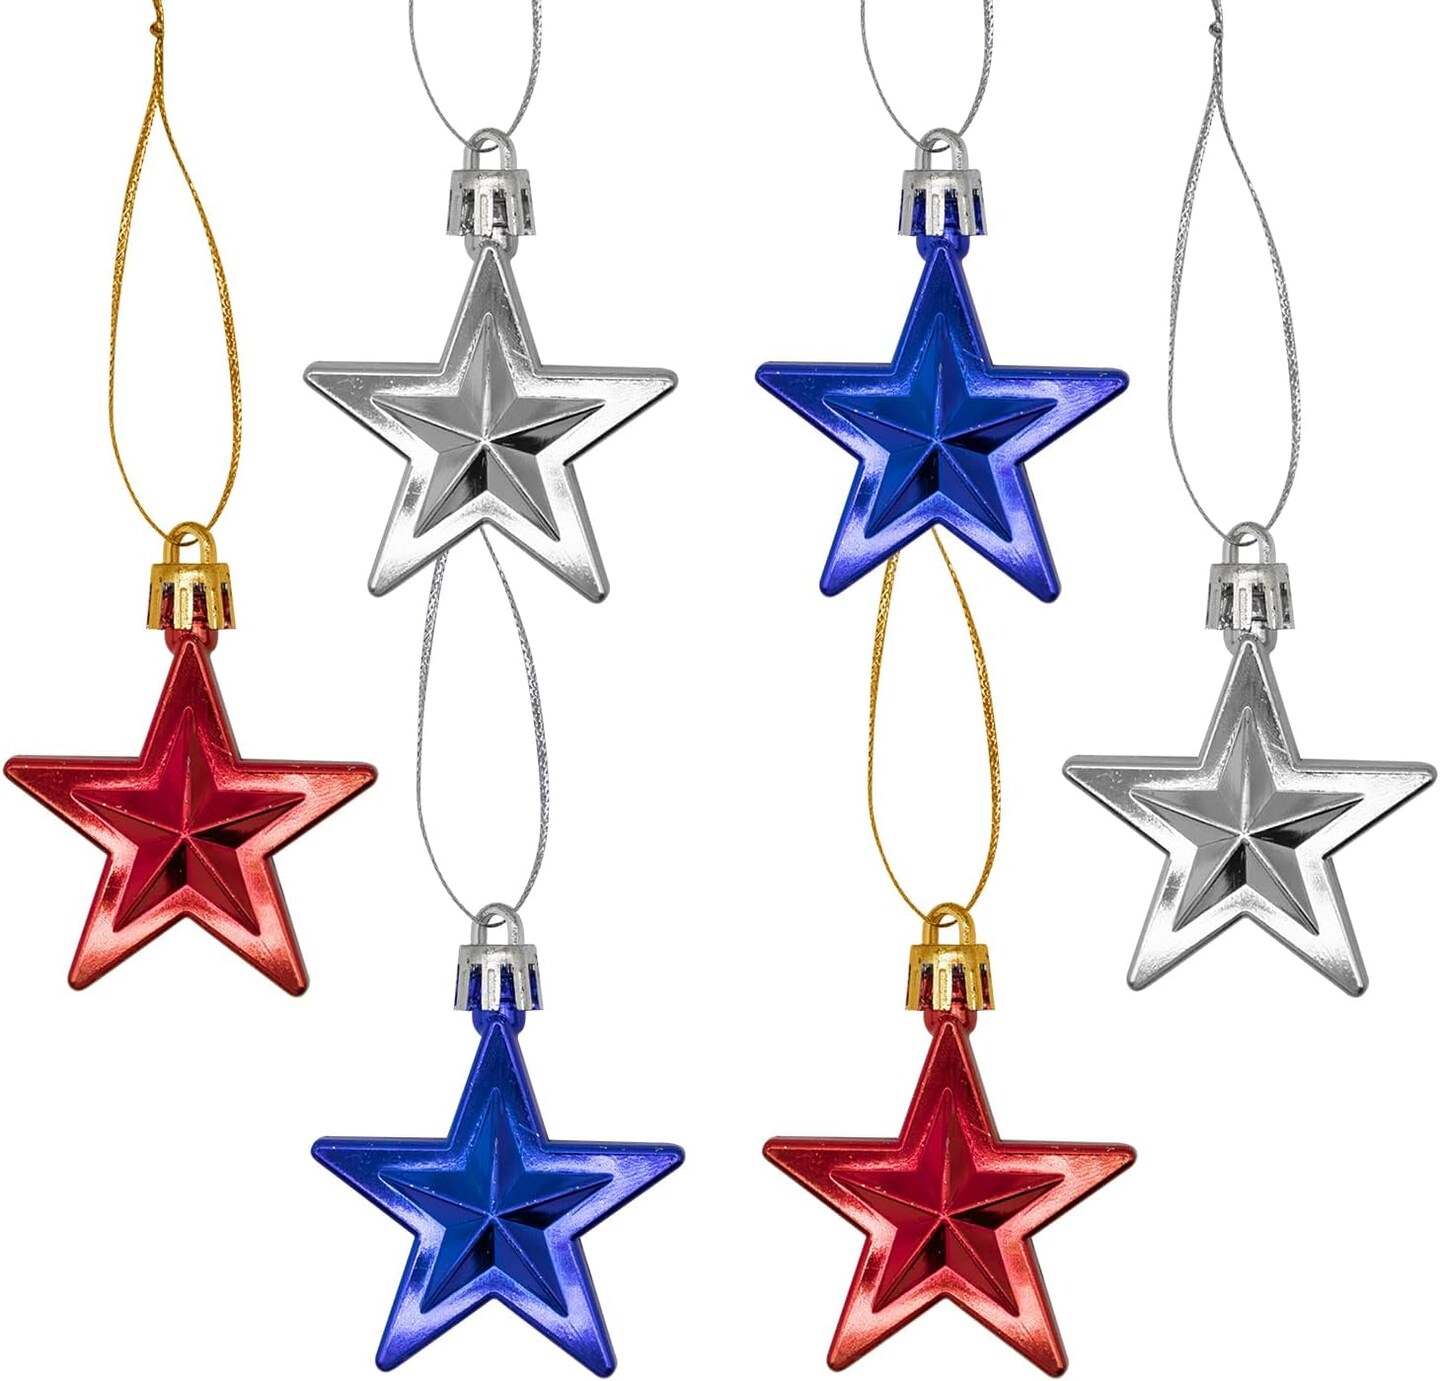 Hanging Star Ornaments Patriotic Christmas Star Ornaments Tree Decorations Blue Red Silver